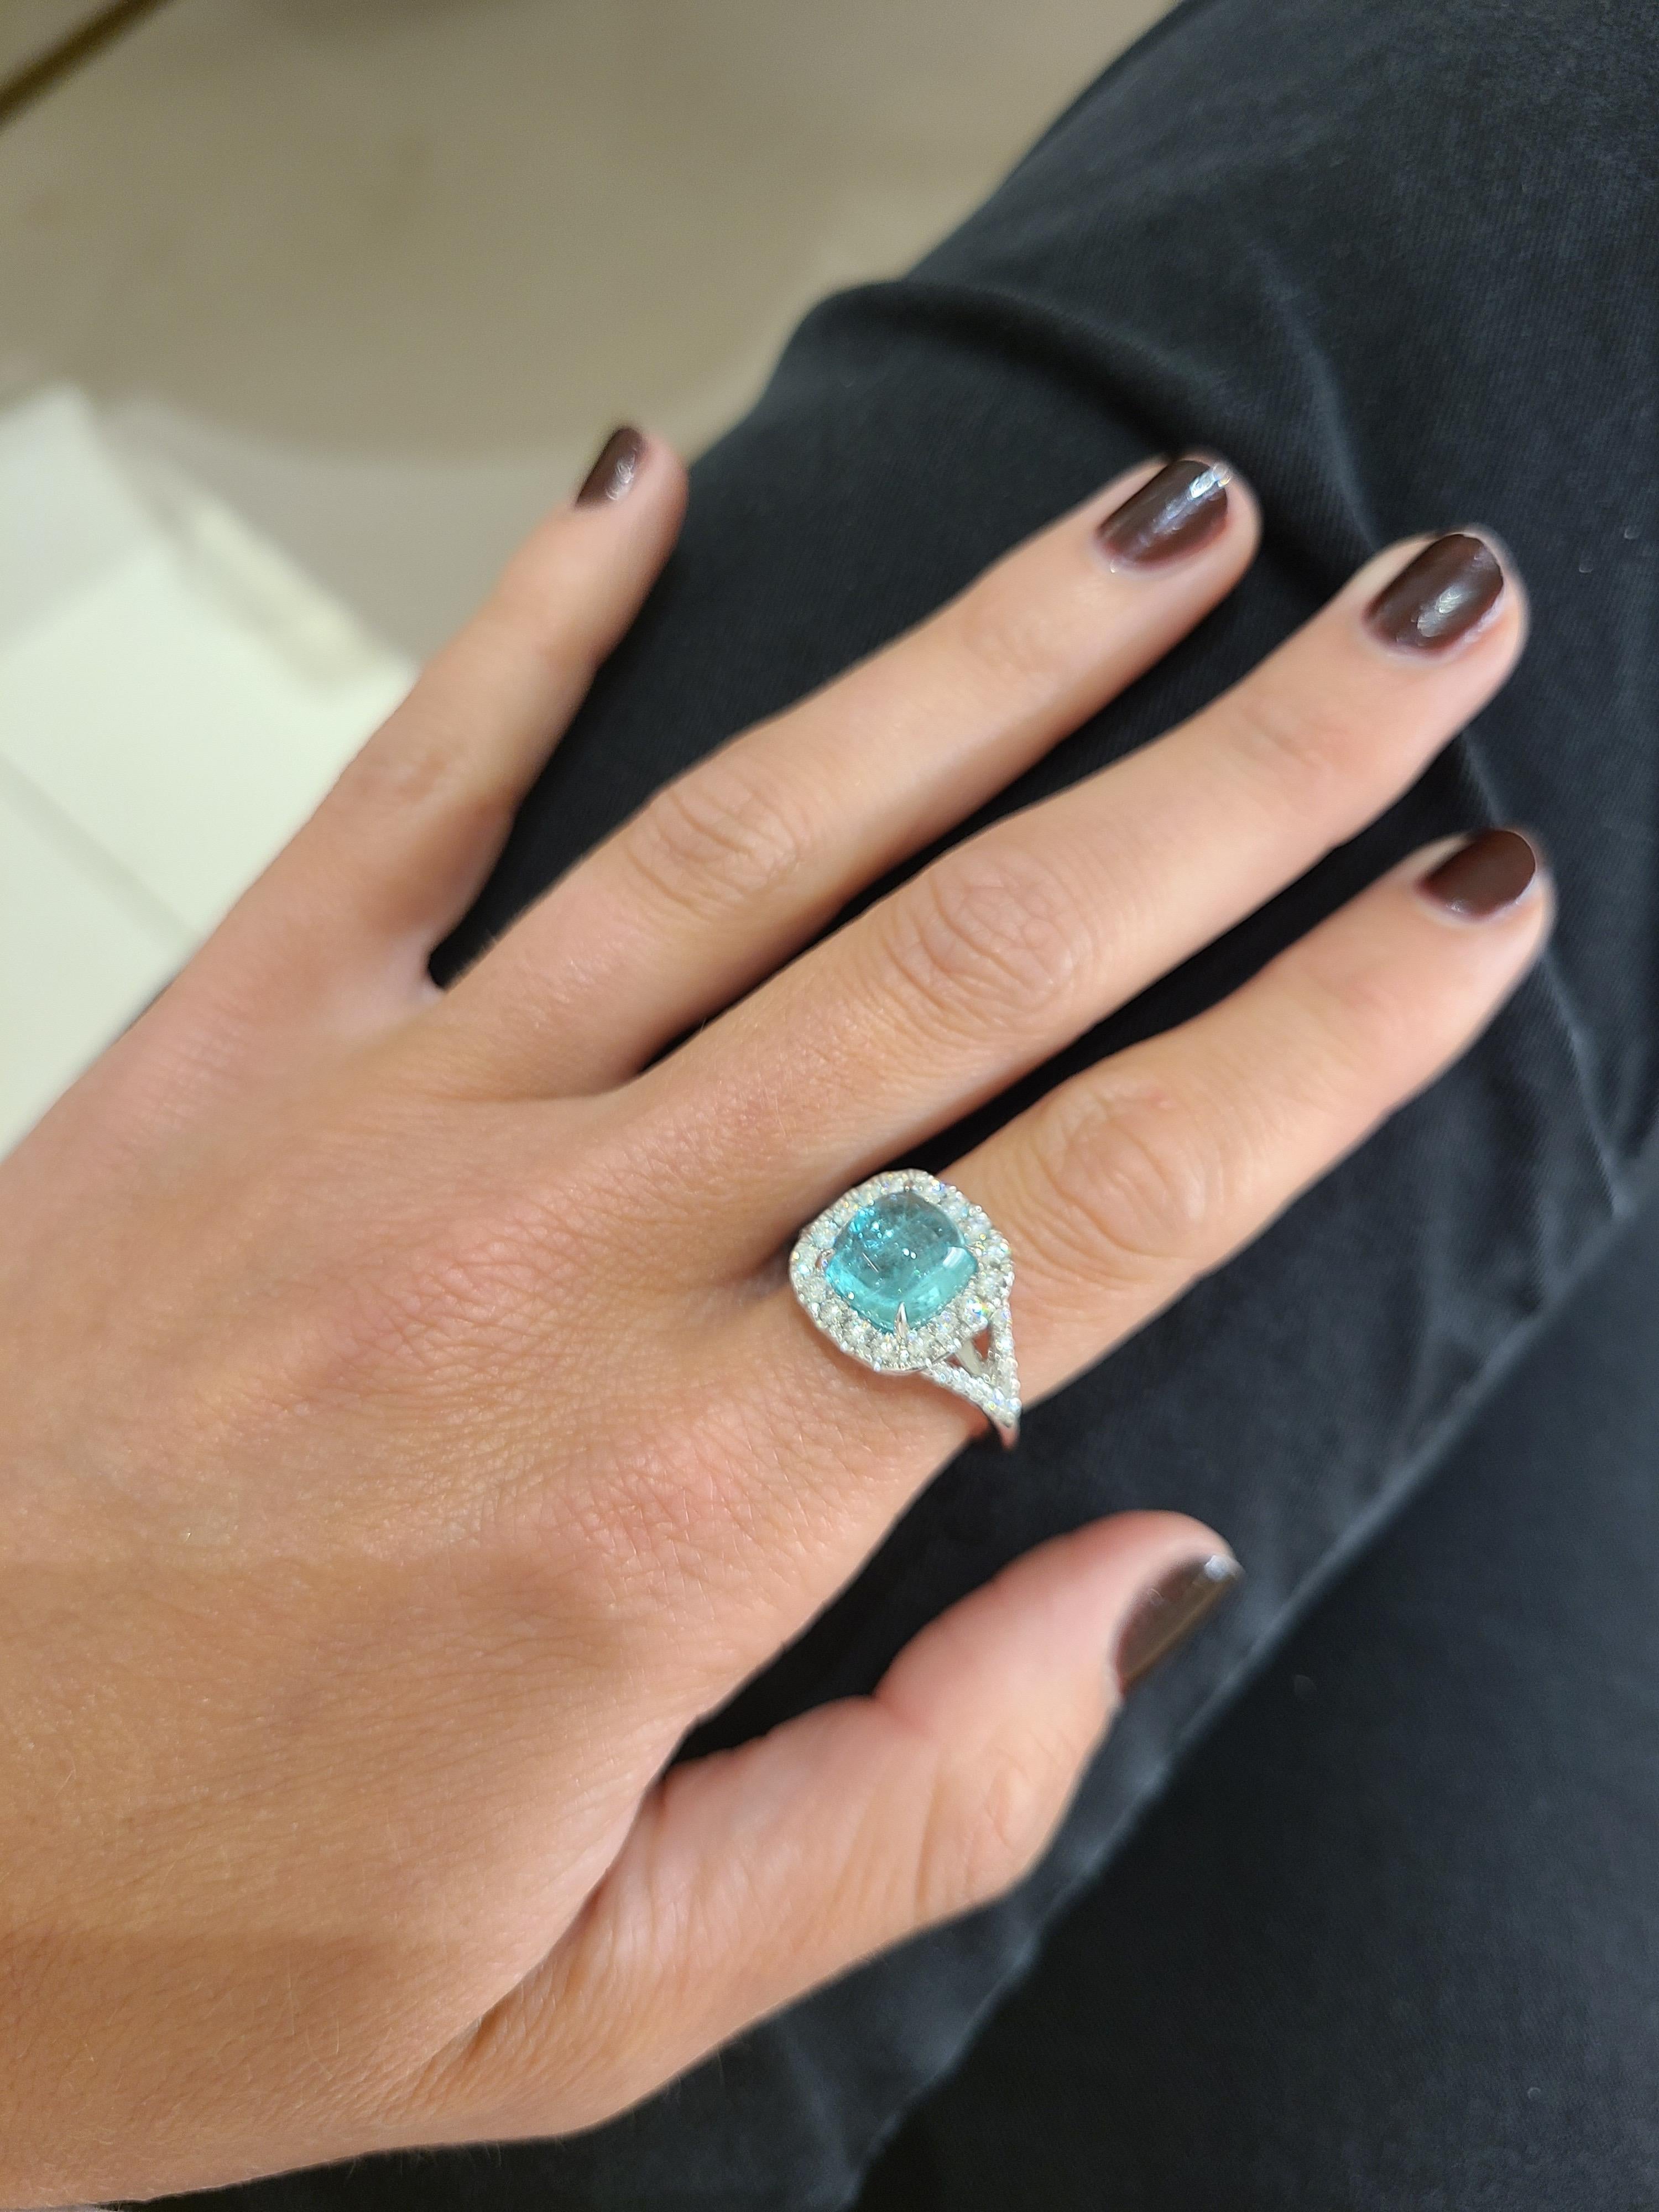 Women's or Men's 18kt White Gold 4.07ct. Cabochon Paraiba Tourmaline and 0.69ct. Diamond Ring